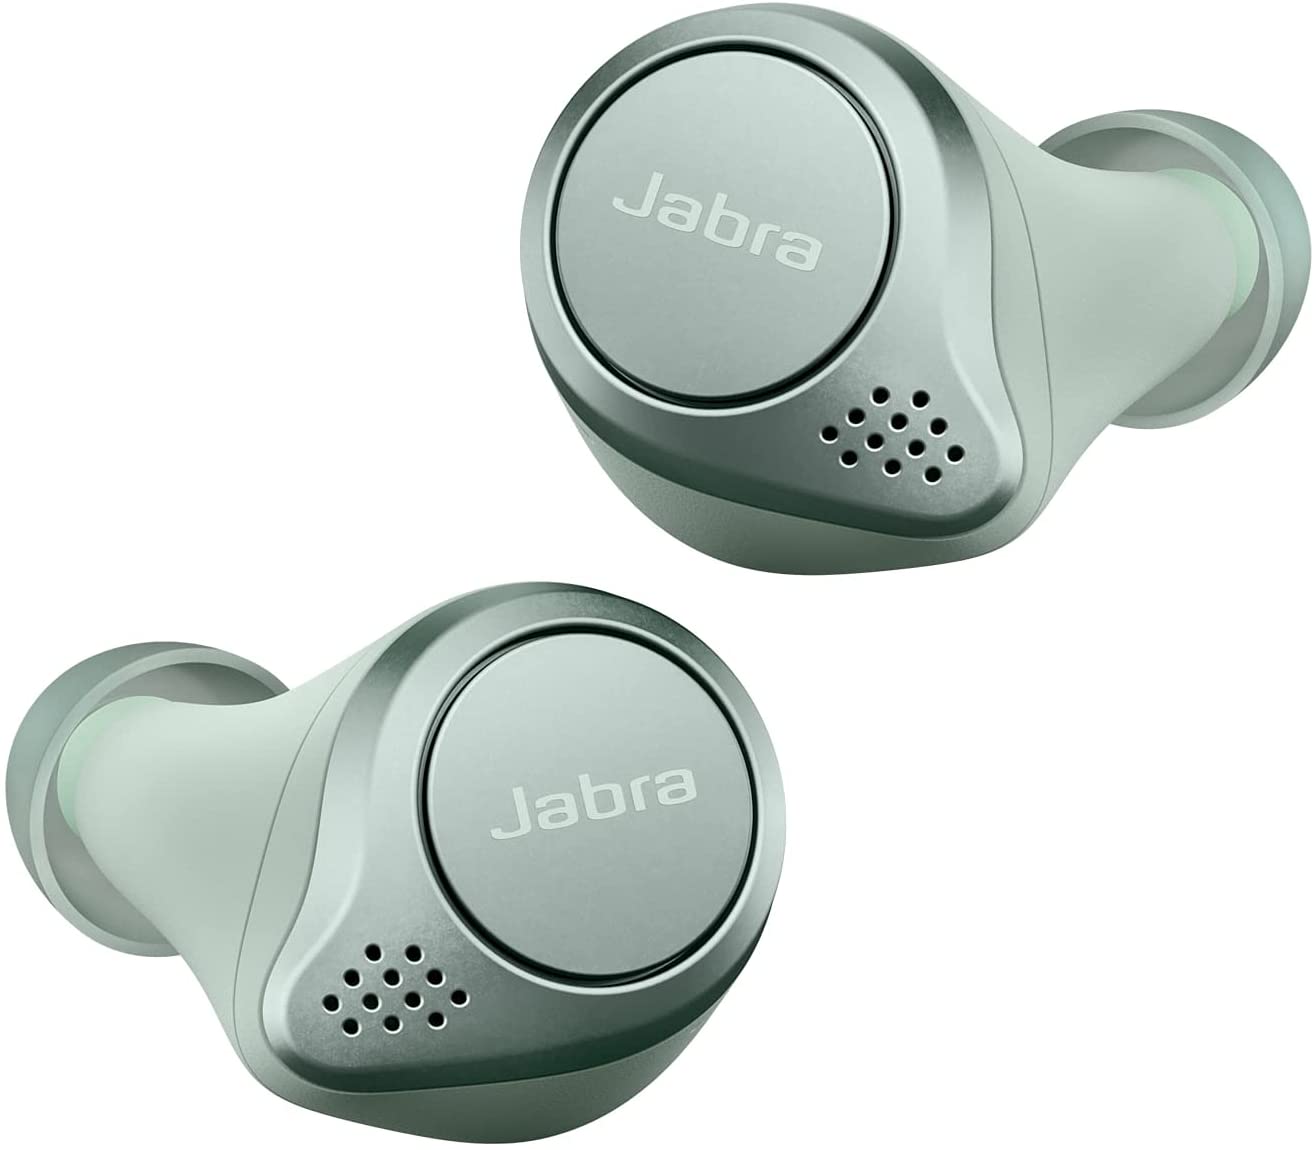 Jabra Elite Active 75t Earbuds – Active Noise Cancelling True Wireless Sports Earphones with Long Battery Life for Calls and Music – Mint